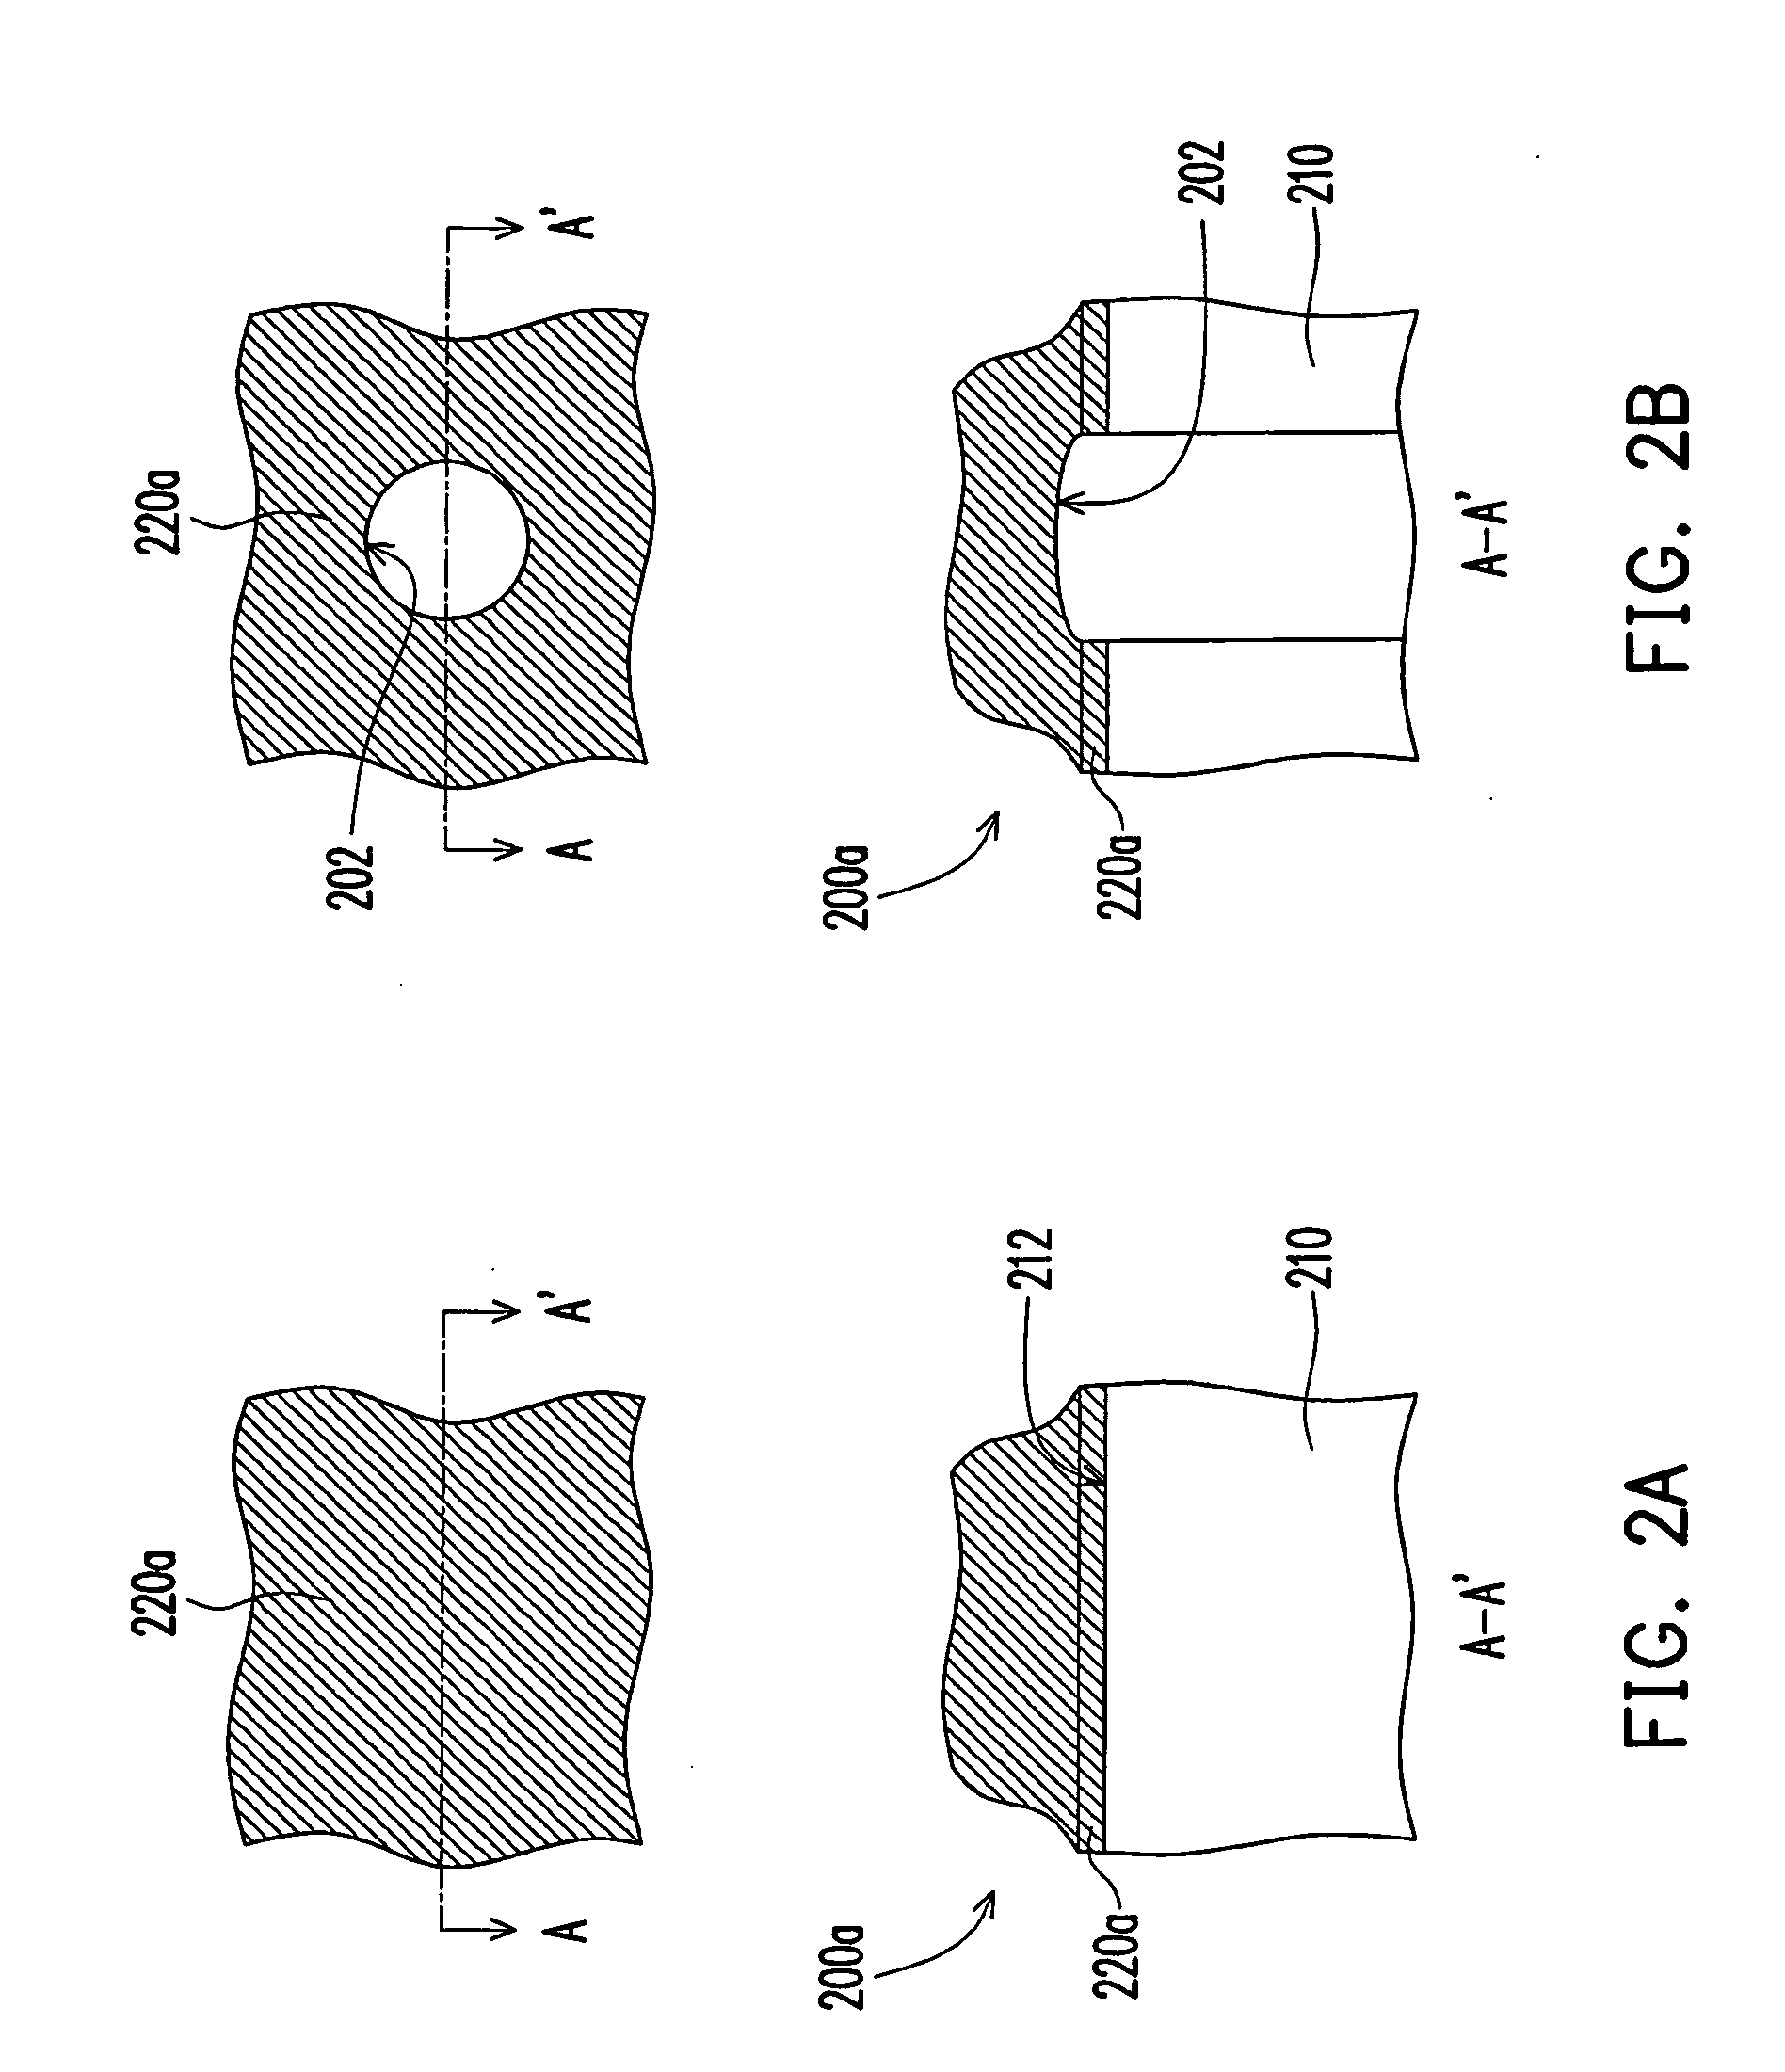 Method of forming measuring targets for measuring dimensions of substrate in substrate manufacturing process